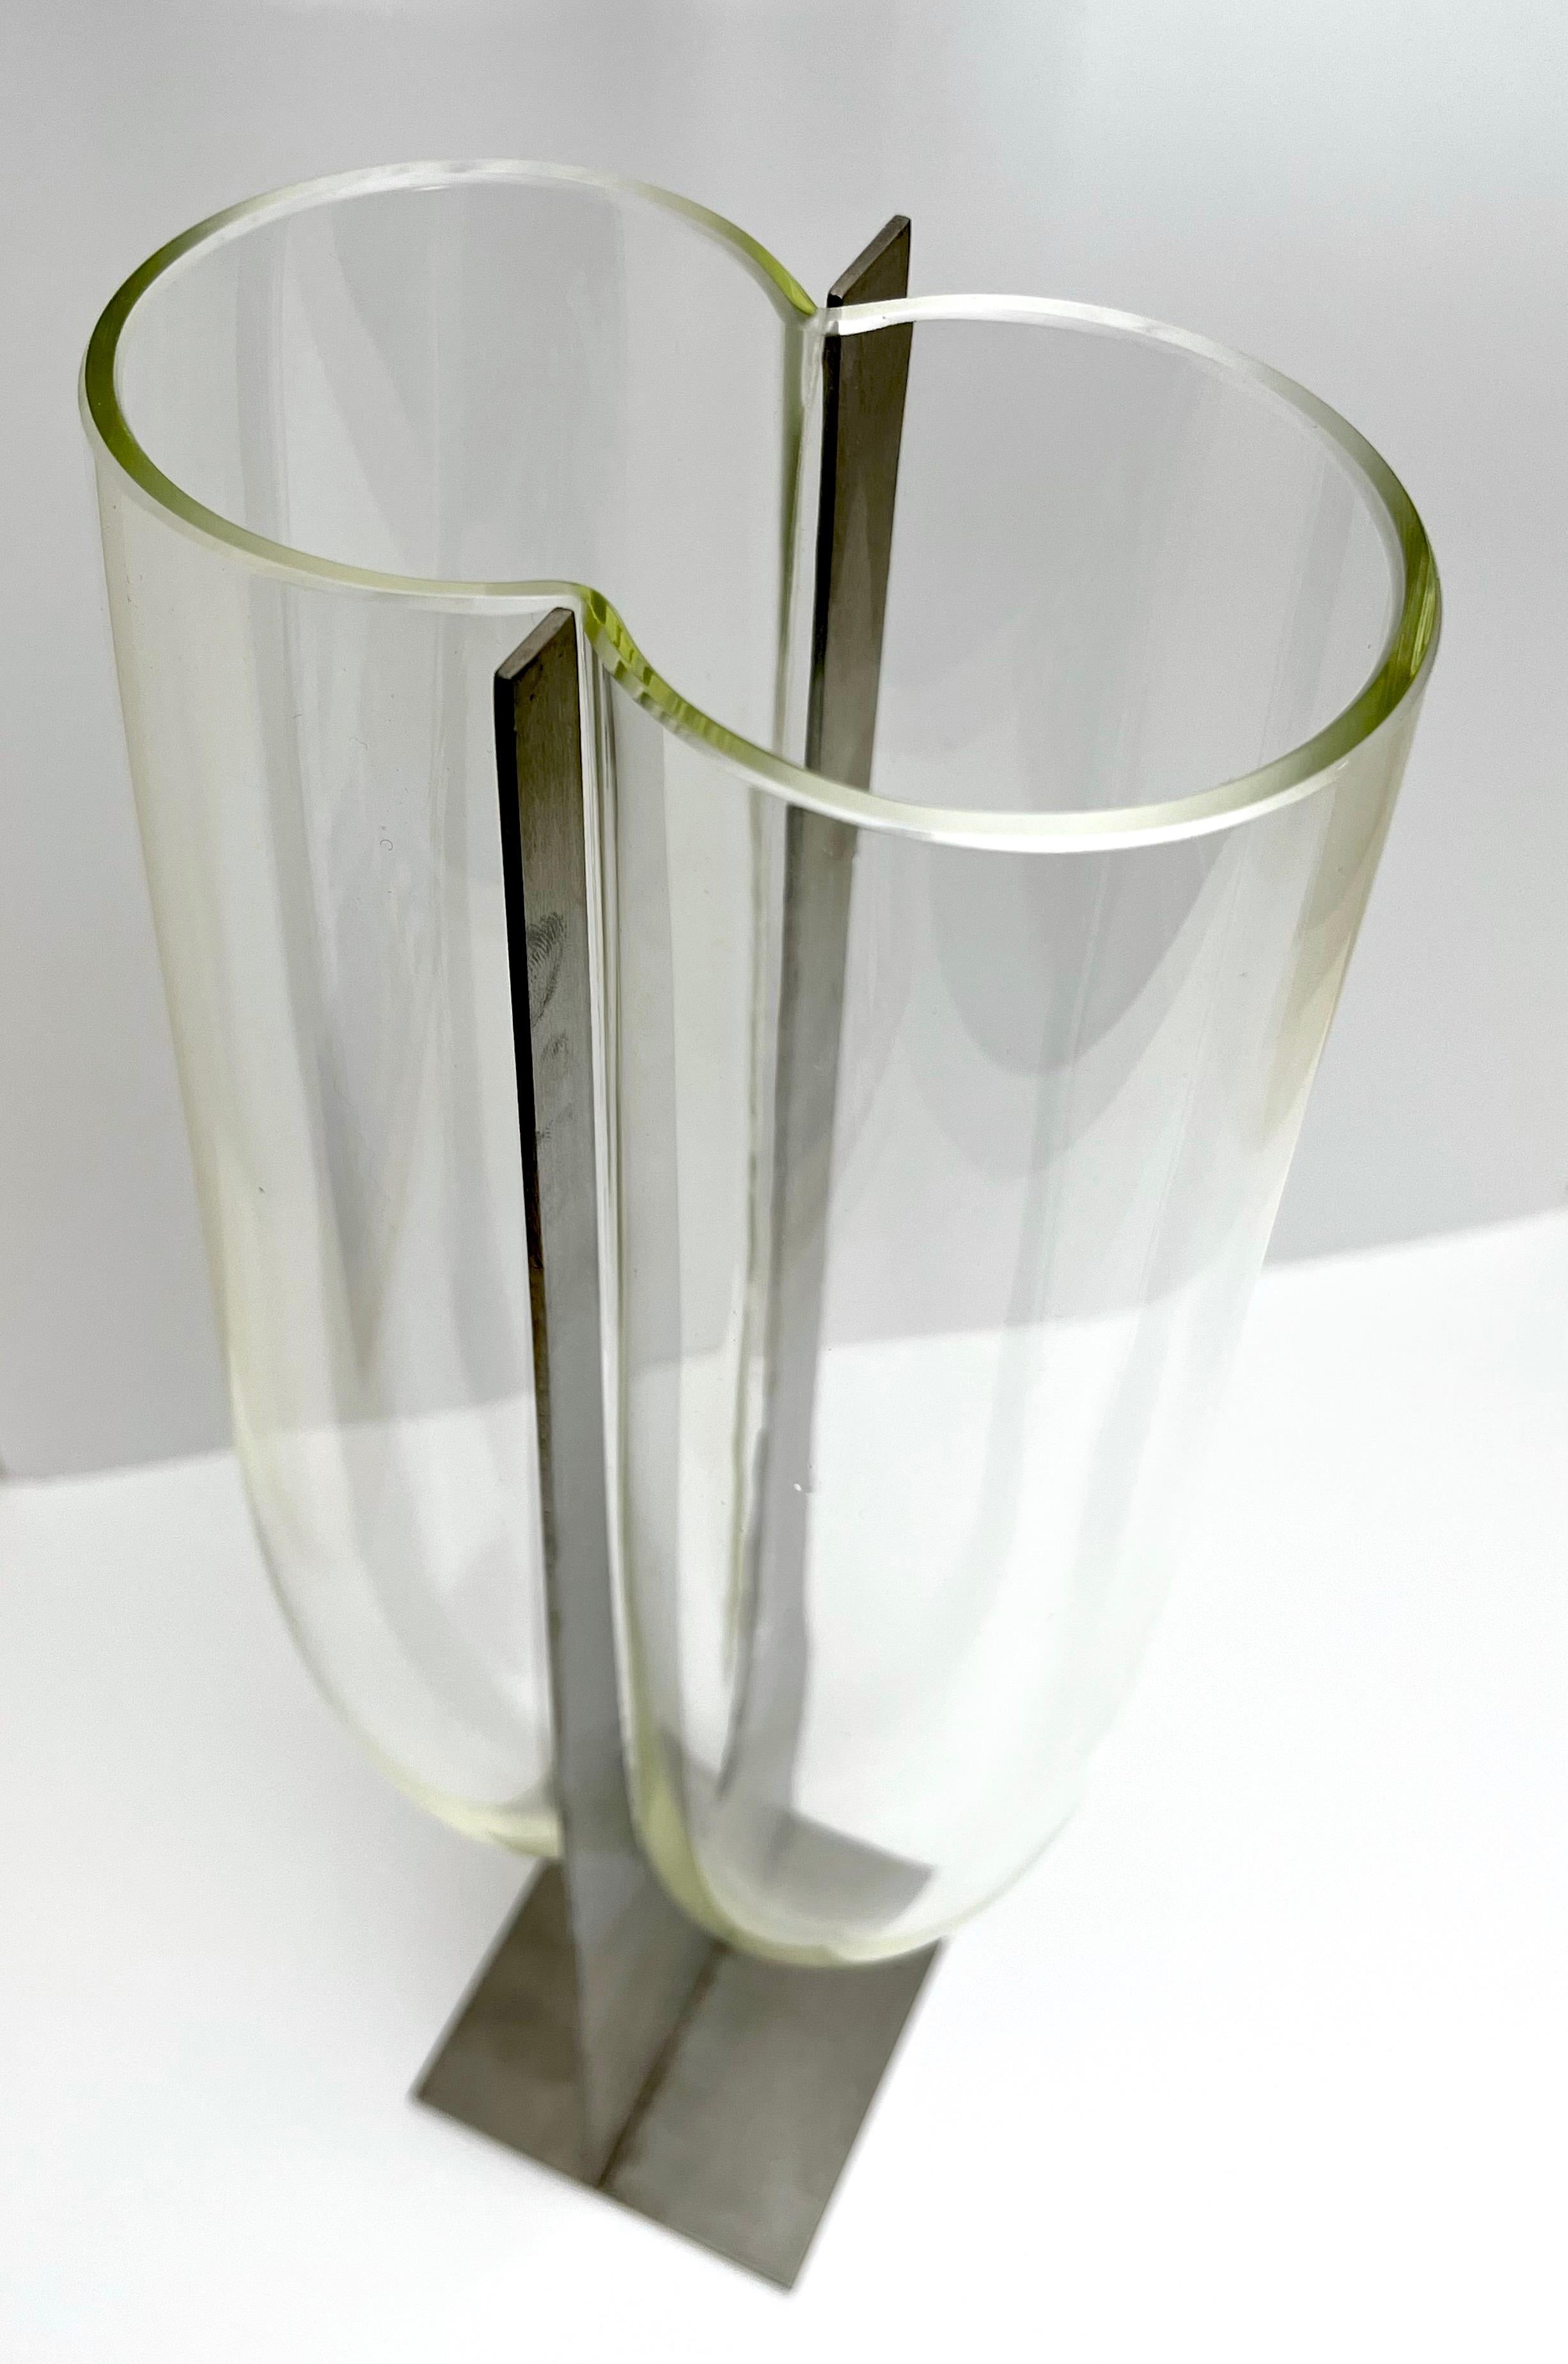 Late 20th Century Carlo Nason Glass and Steel Vase by Mazzega